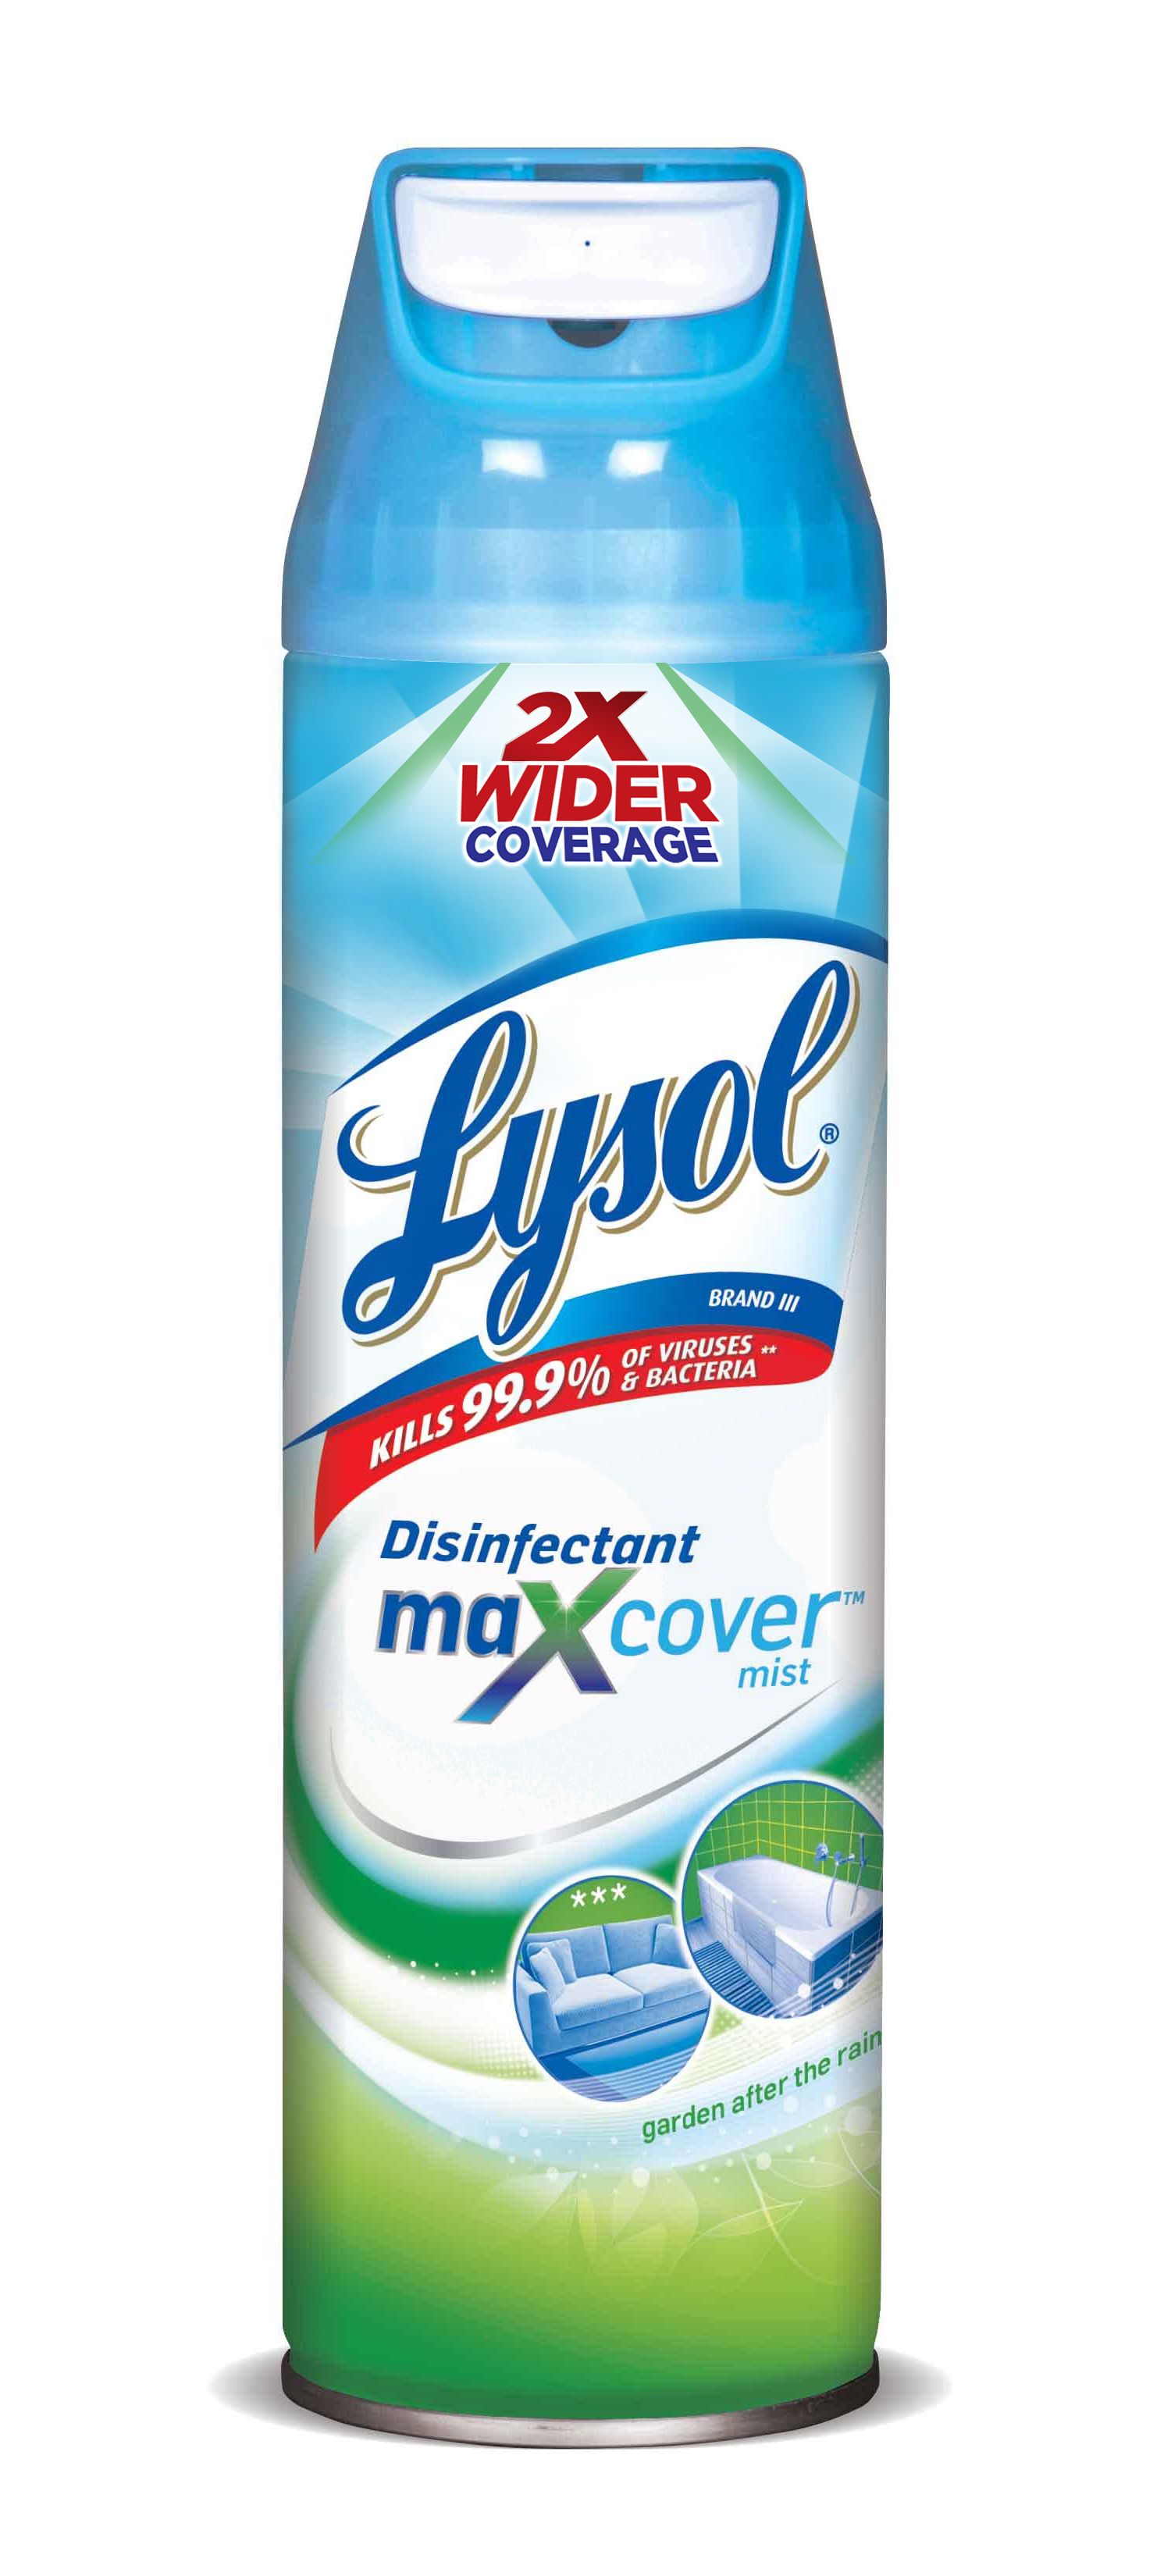 LYSOL® Disinfectant Max Cover Mist - Garden after the Rain